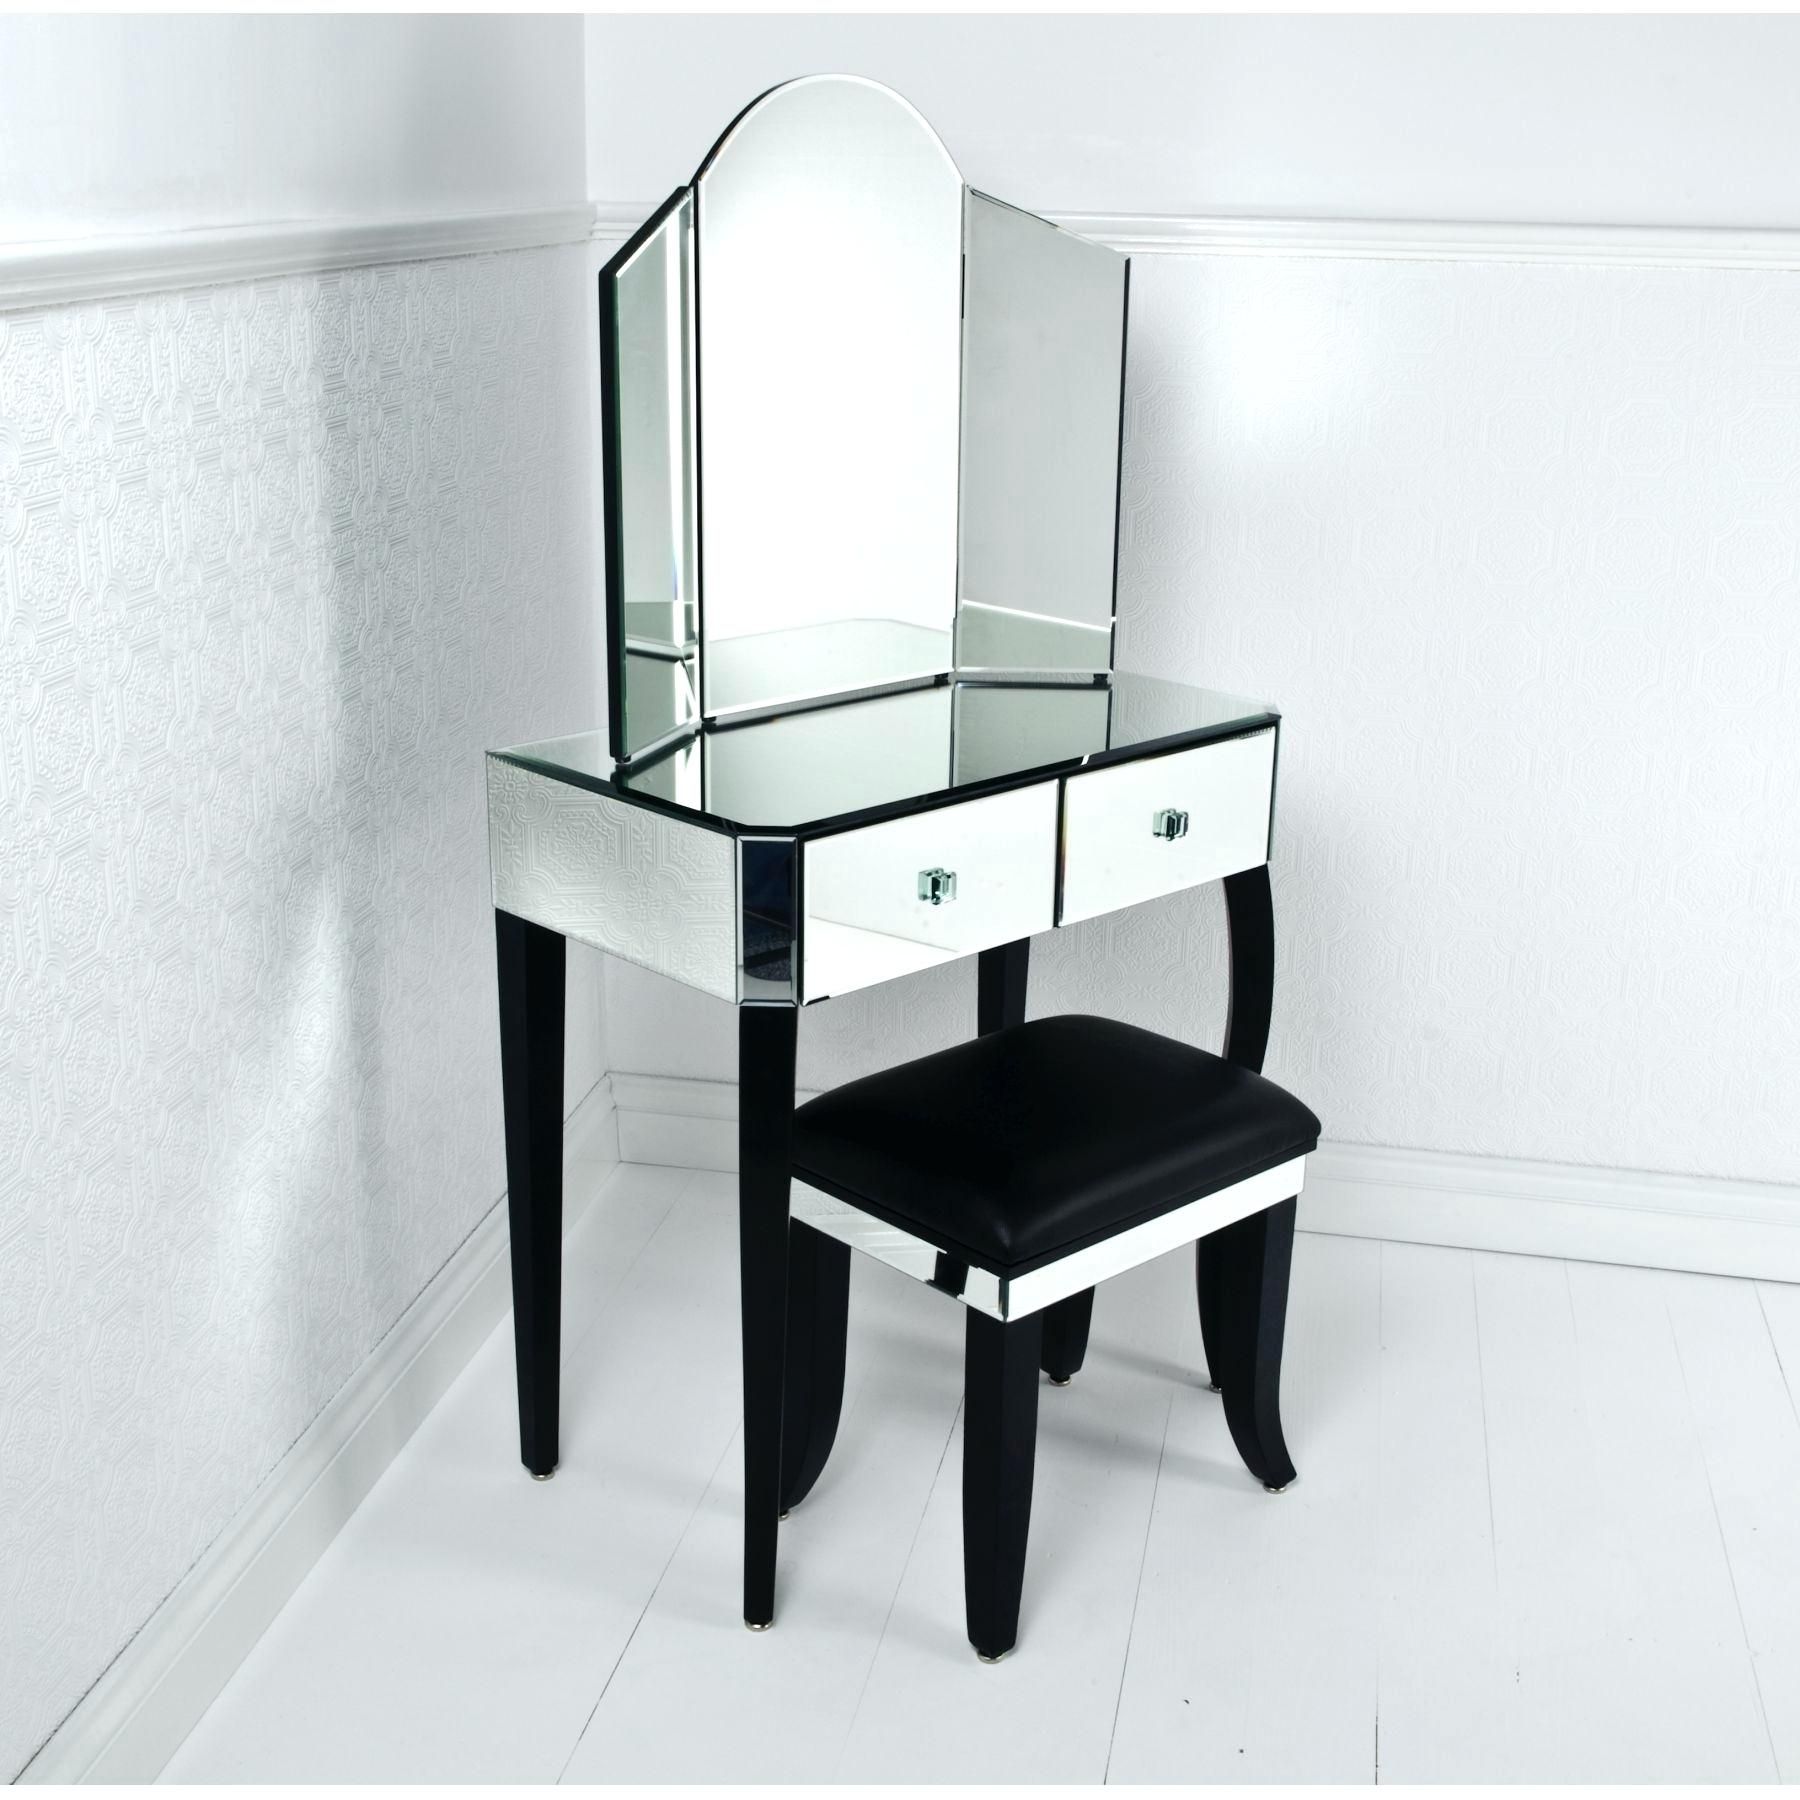 Mirror Dressers And Nightstands Architectural Mirrored Furniture Intended For Very Large Round Mirror (View 3 of 15)